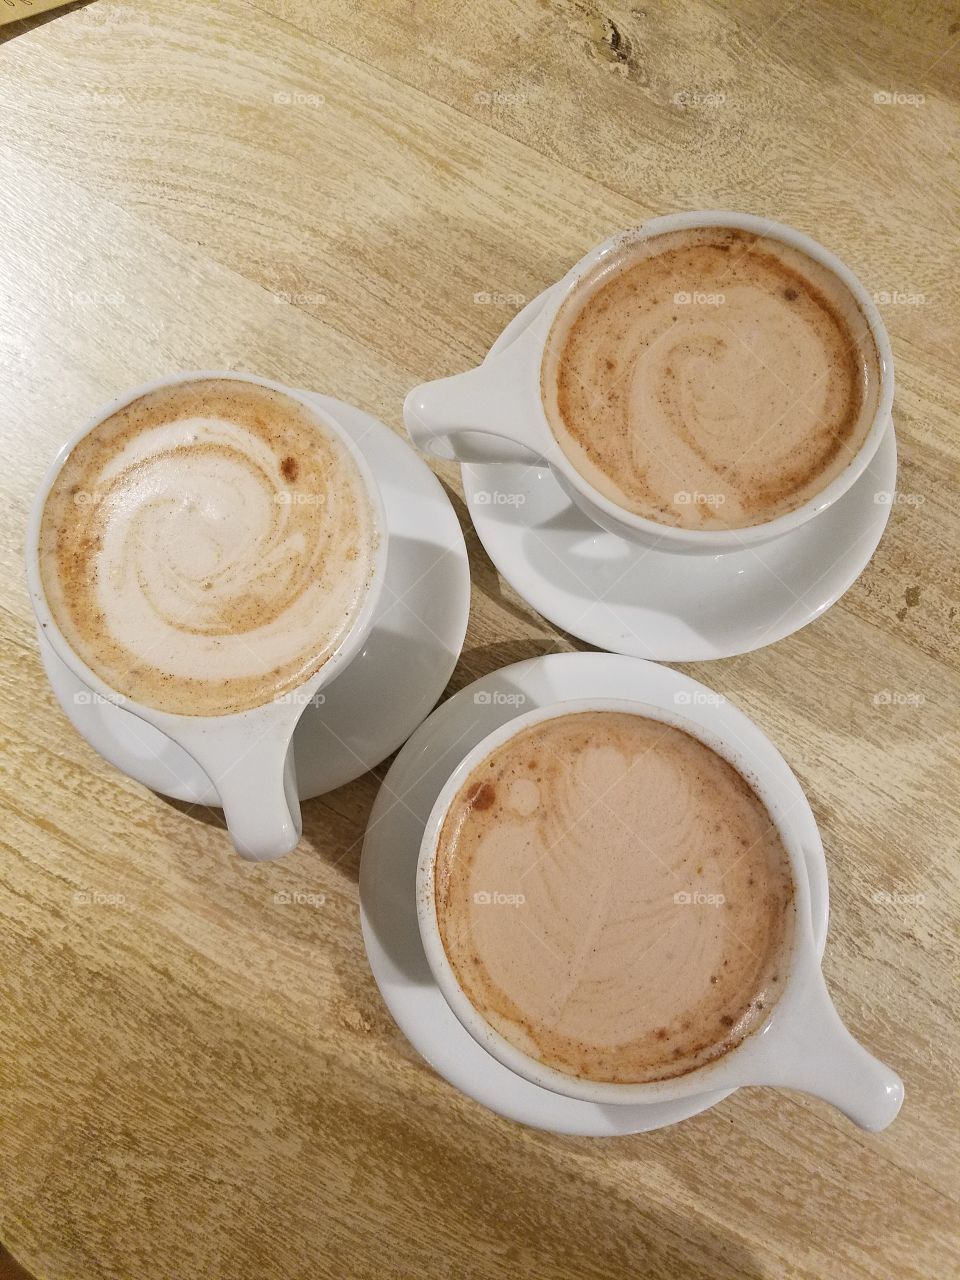 3 cups with 3 friends